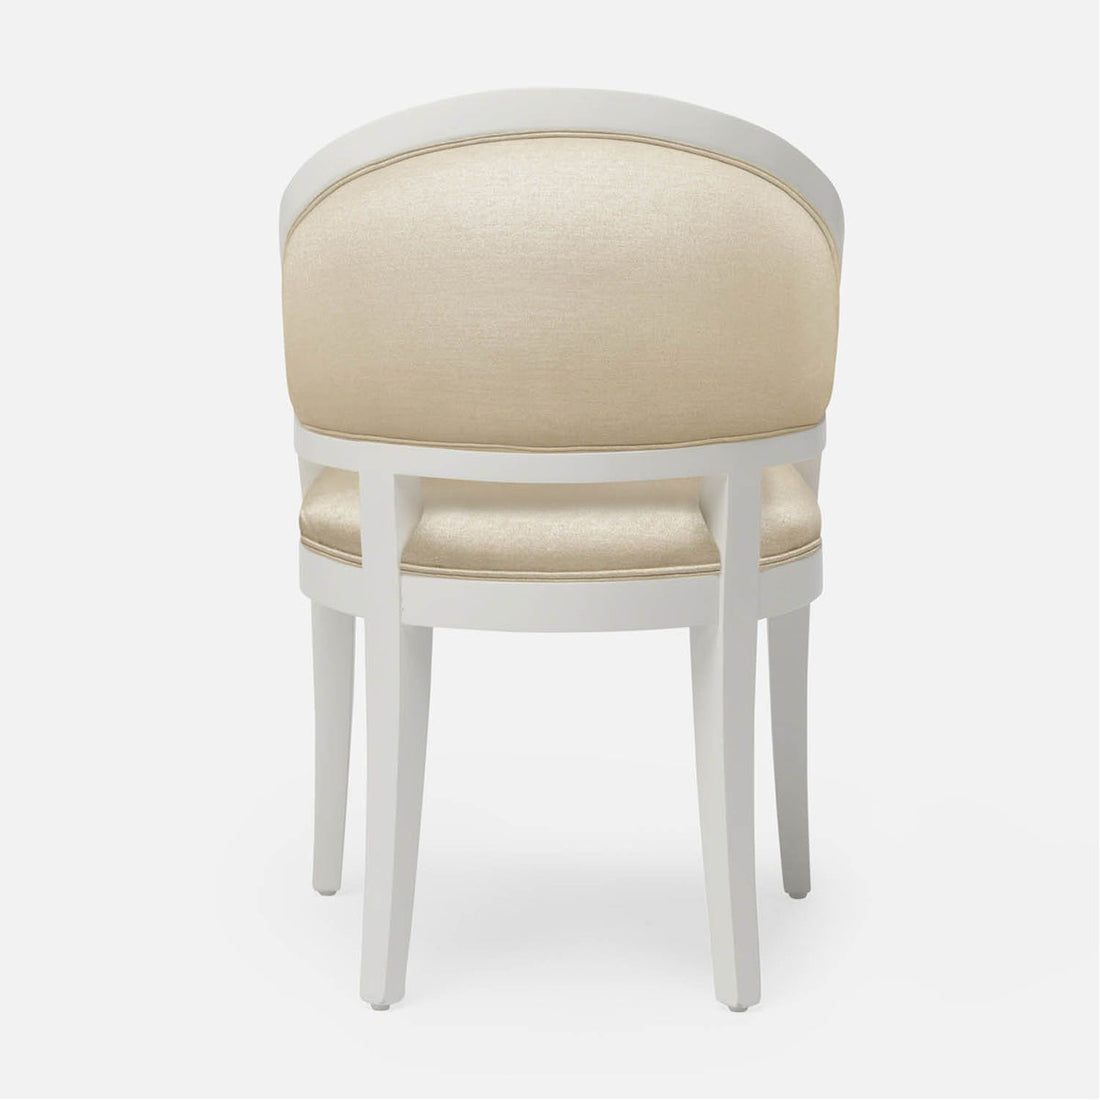 Made Goods Sylvie Curved Back Dining Chair in Humboldt Cotton Jute